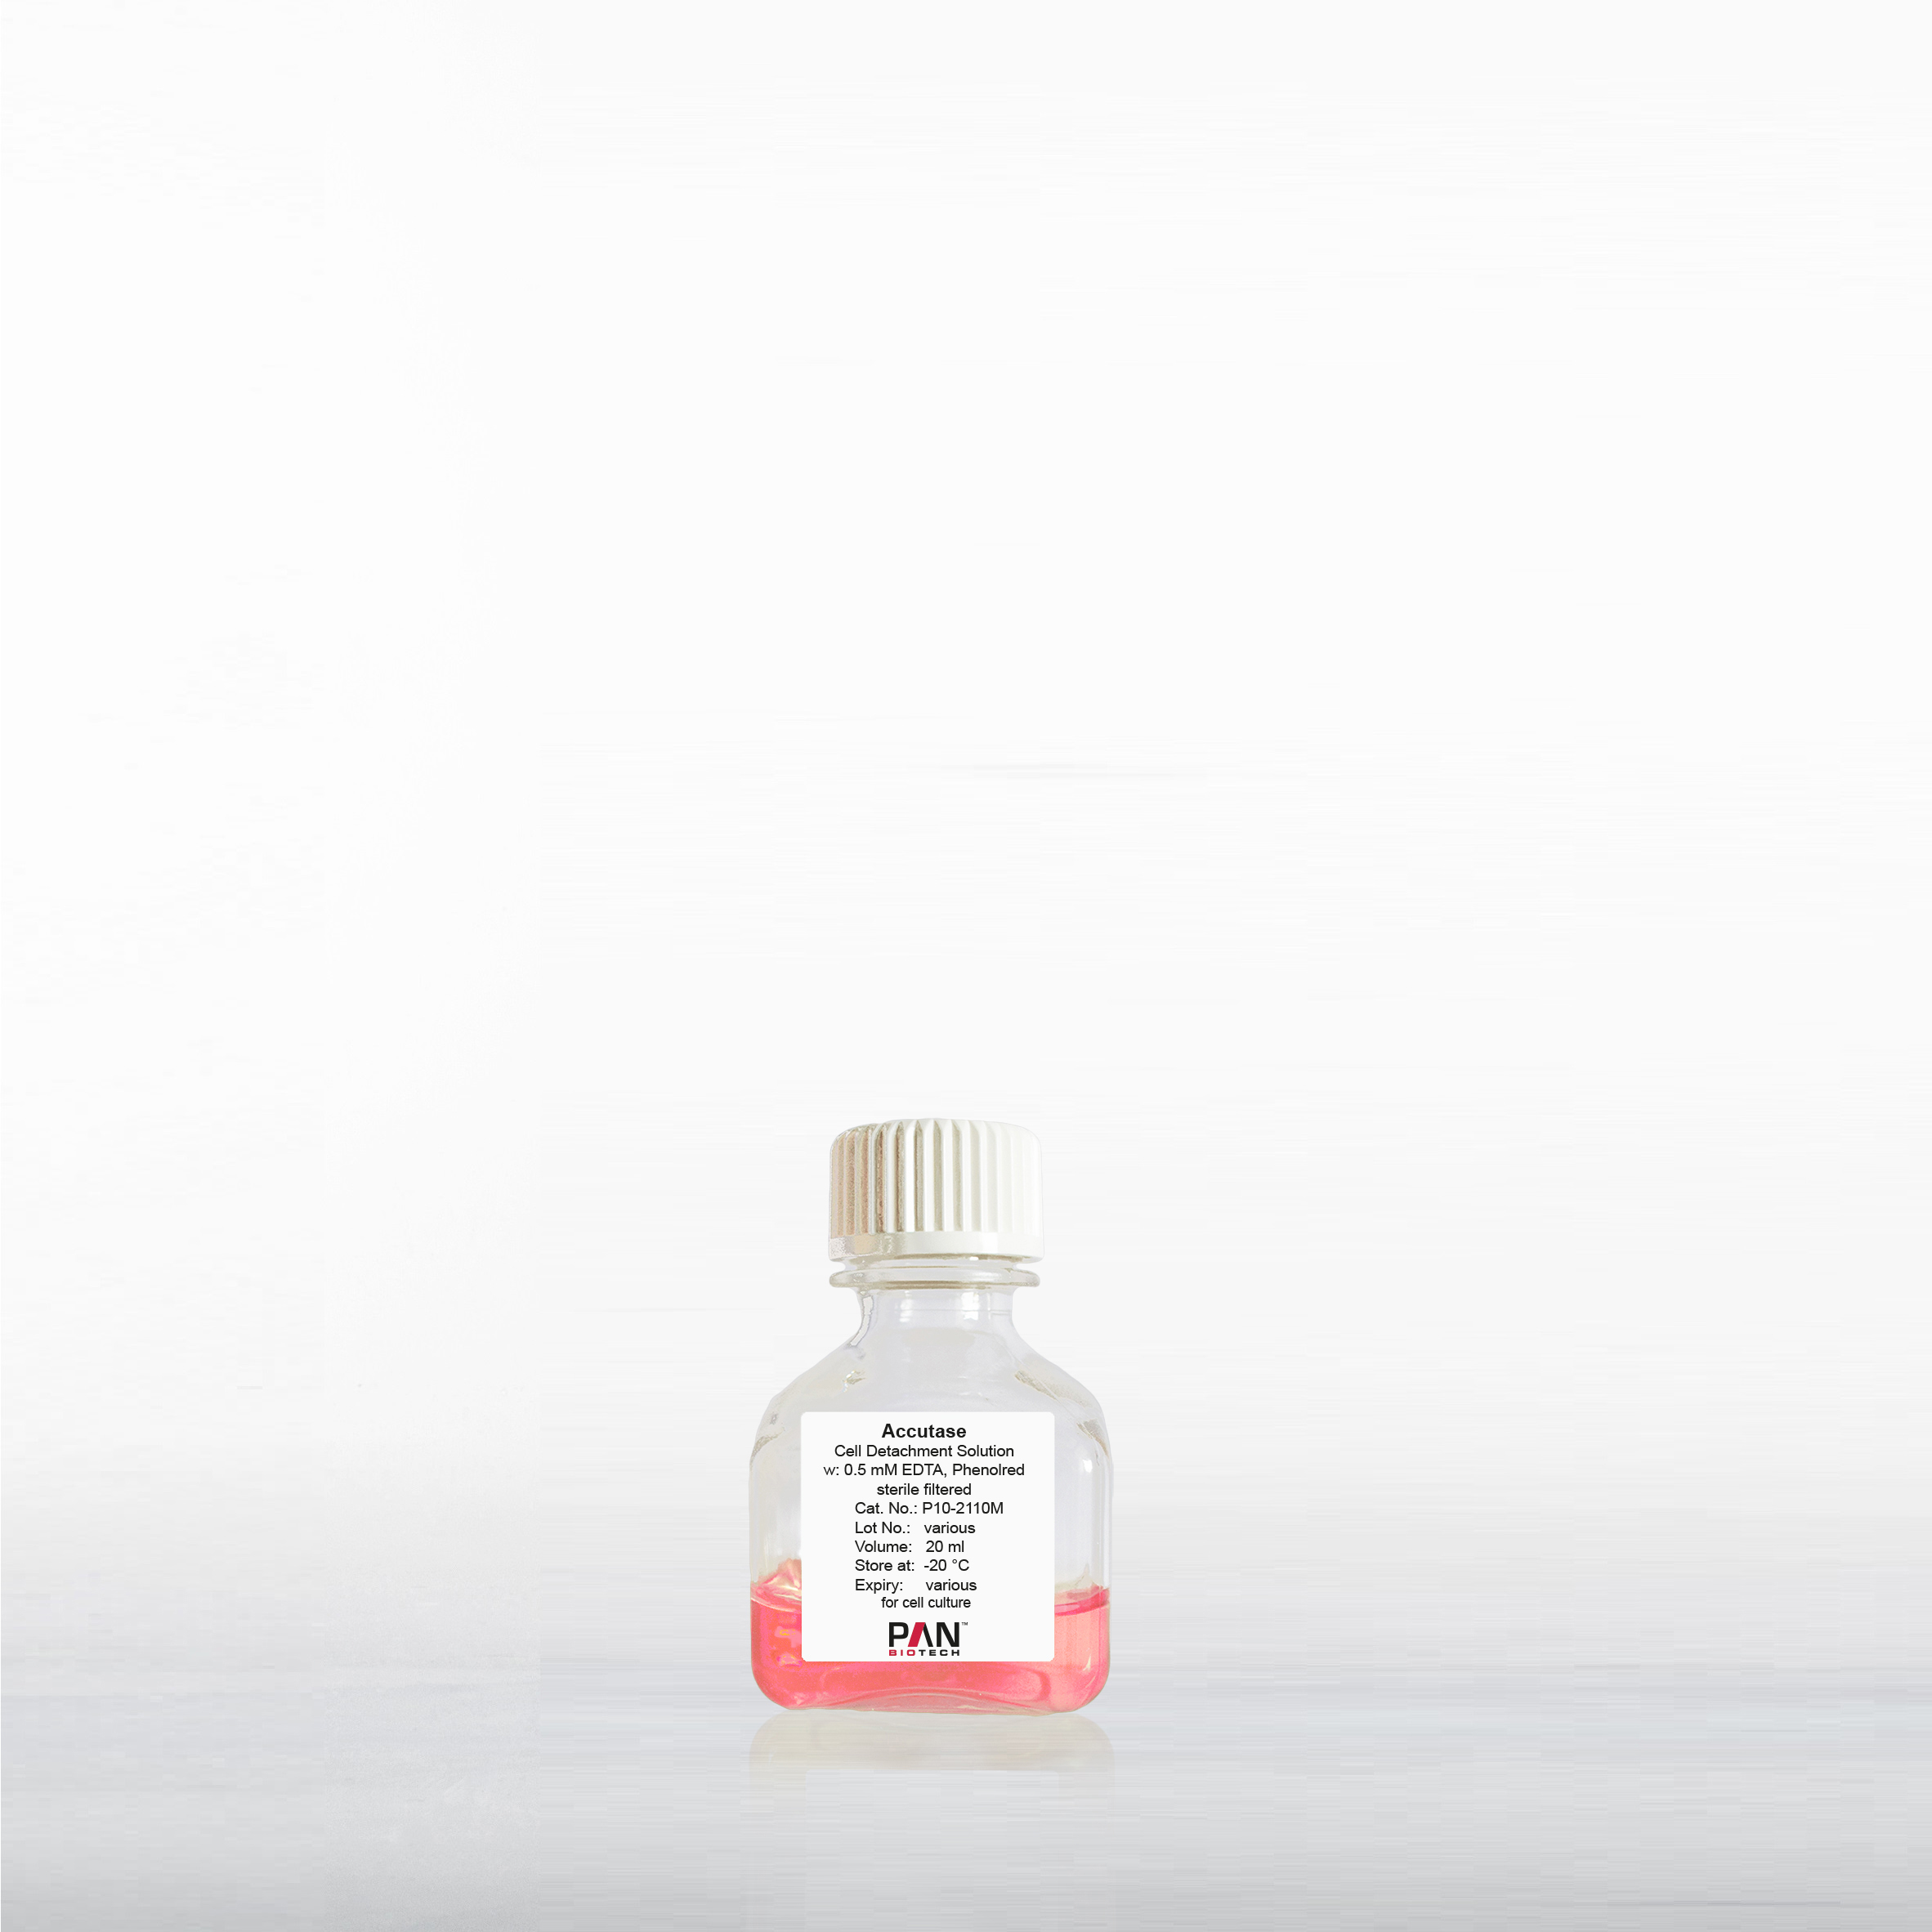 Accutase Cell Detachment Solution, w: 0.5 mM EDTA, w: Phenol red